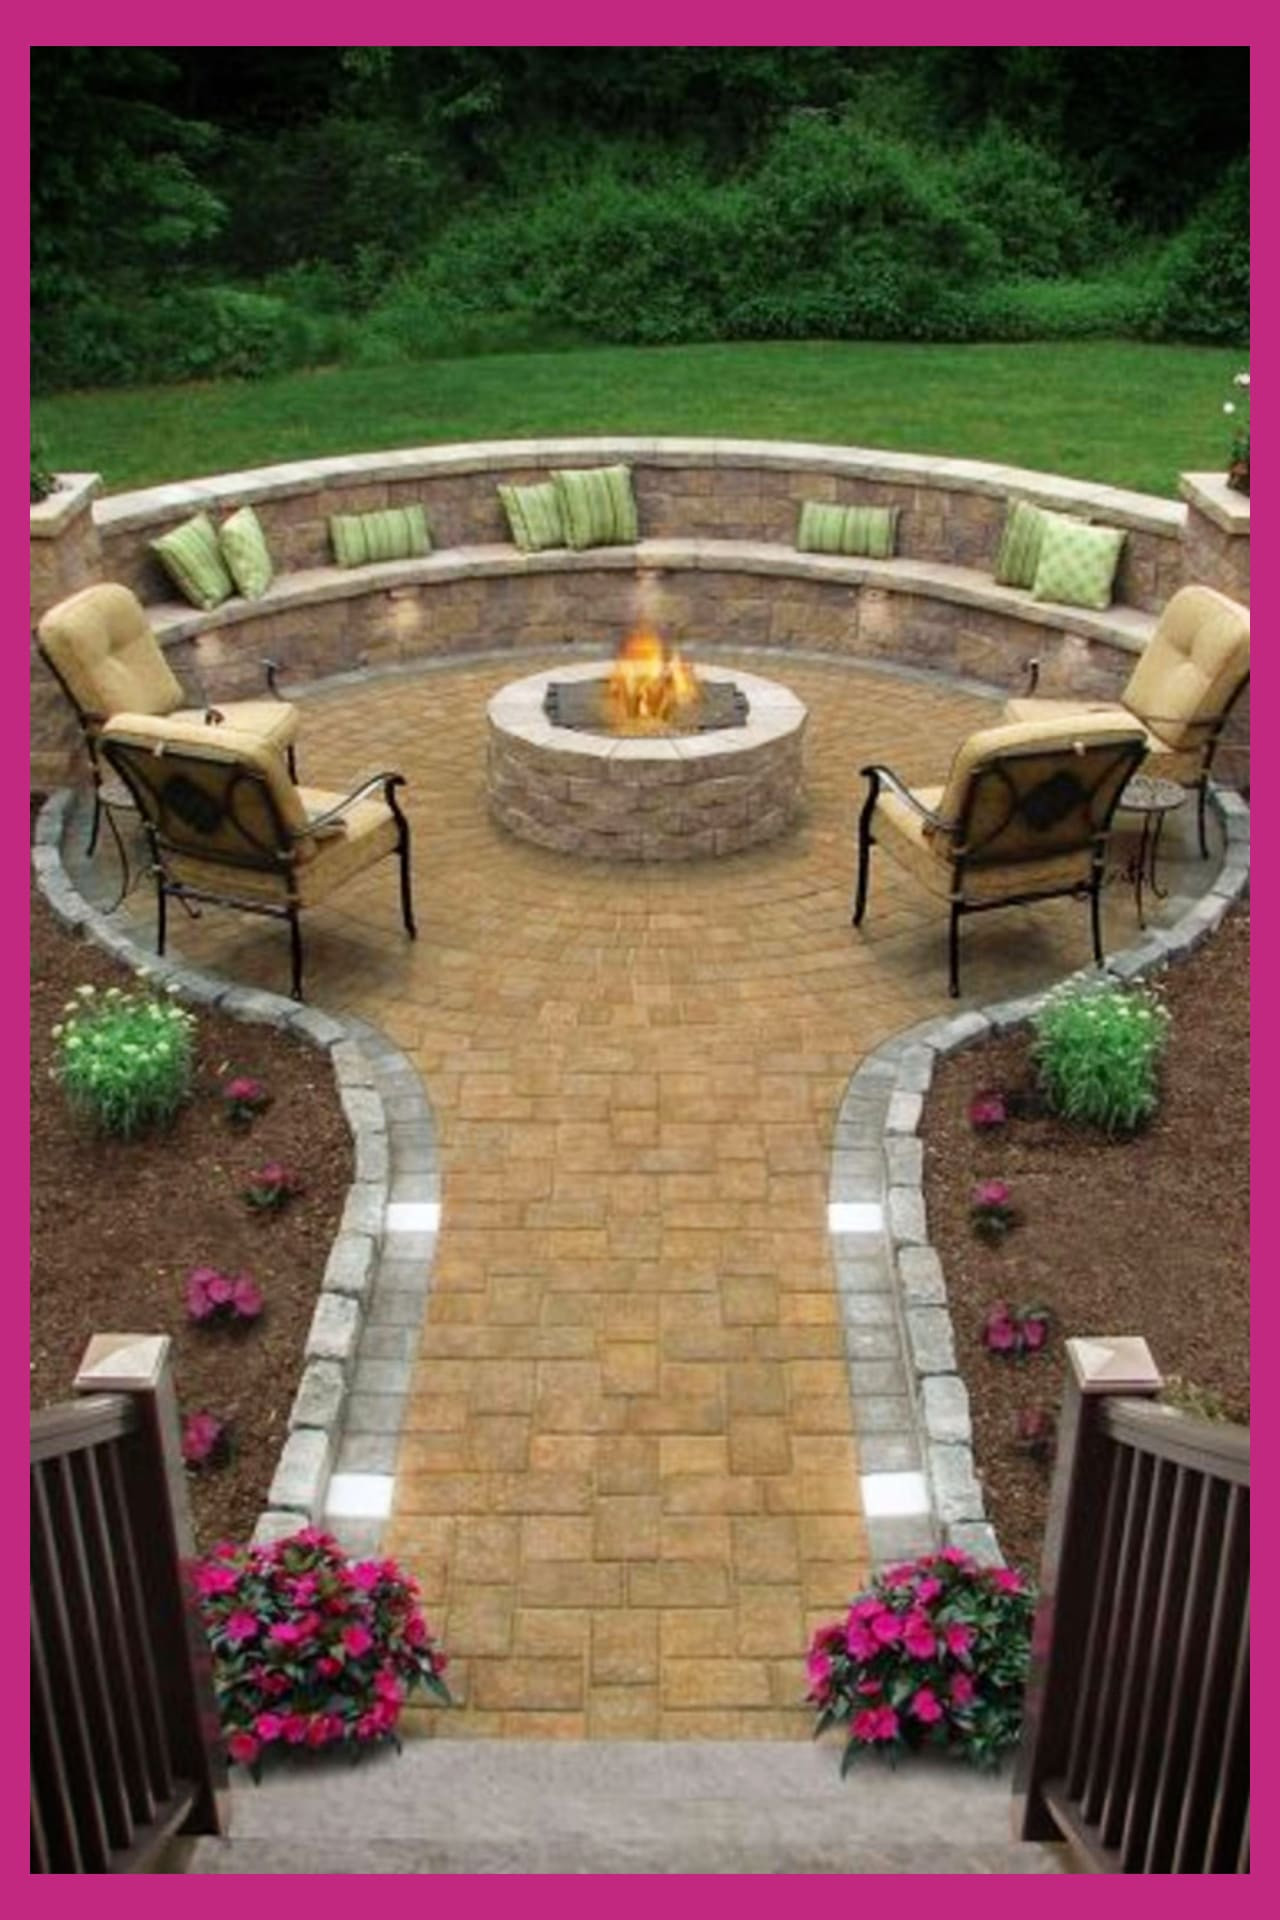 Patio With Fire Pit Ideas
 Backyard Fire Pit Ideas and Designs for Your Yard Deck or